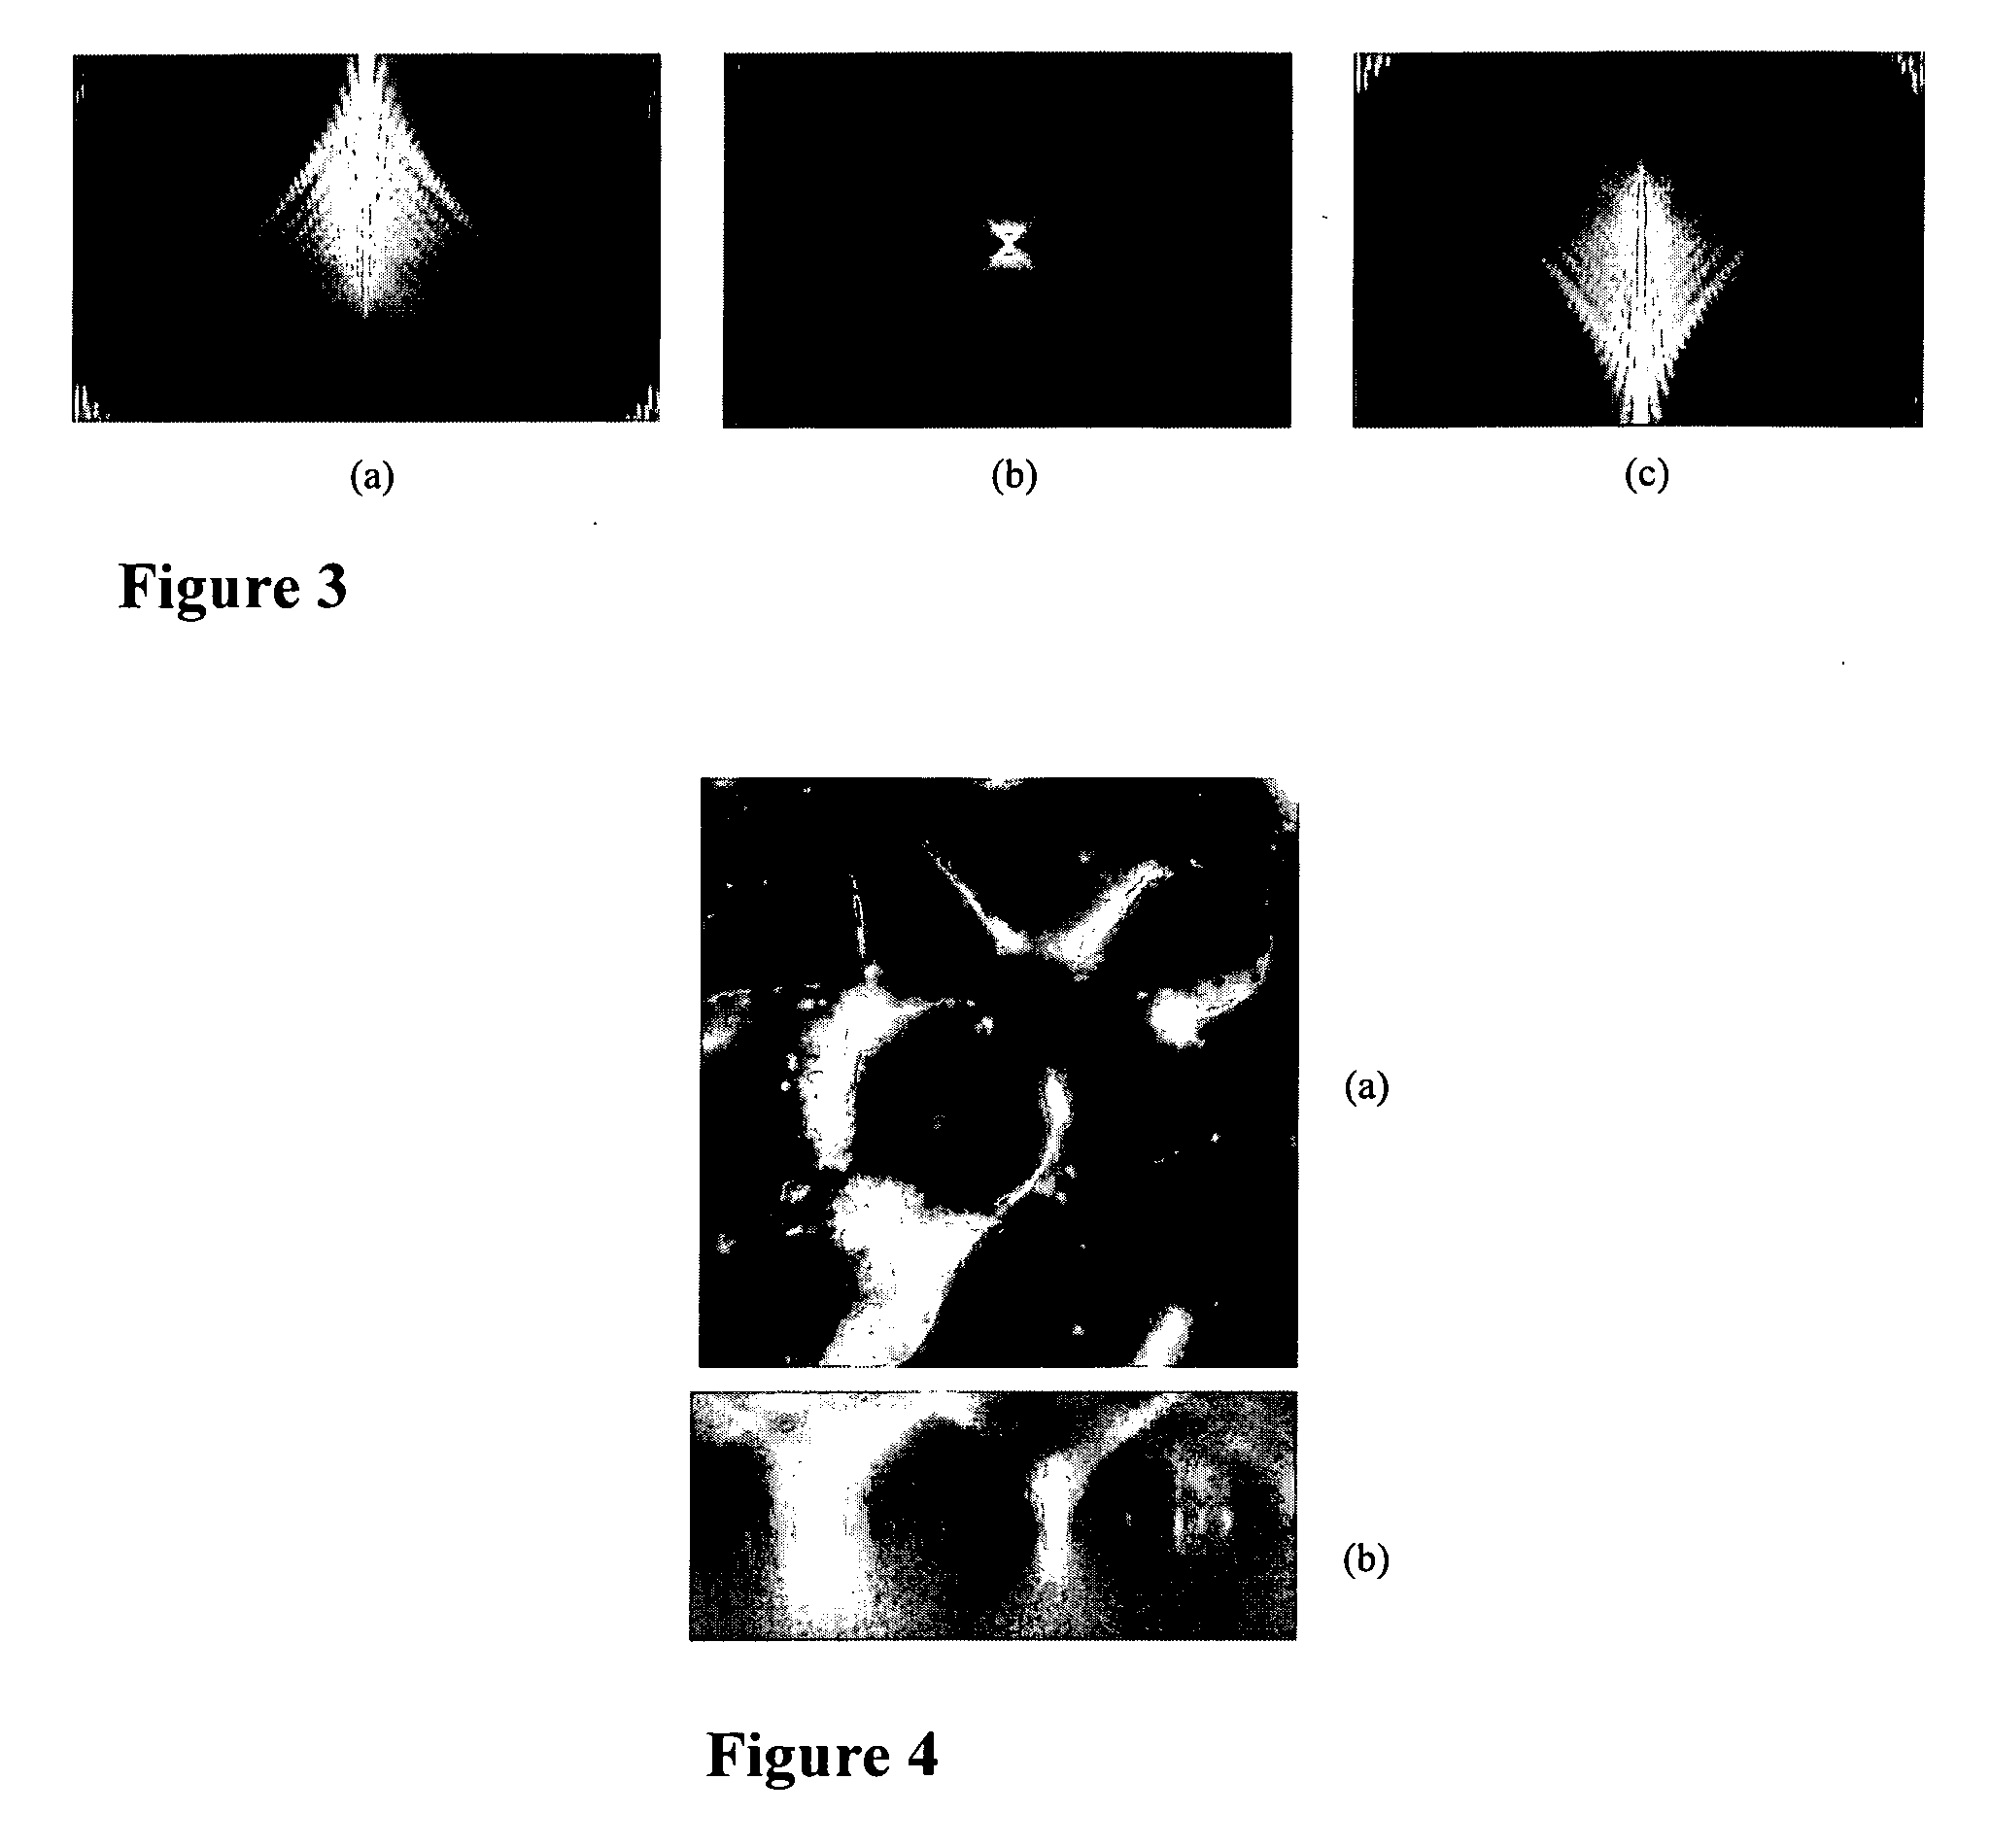 Methods, system, and program product for the detection and correction of spherical aberration